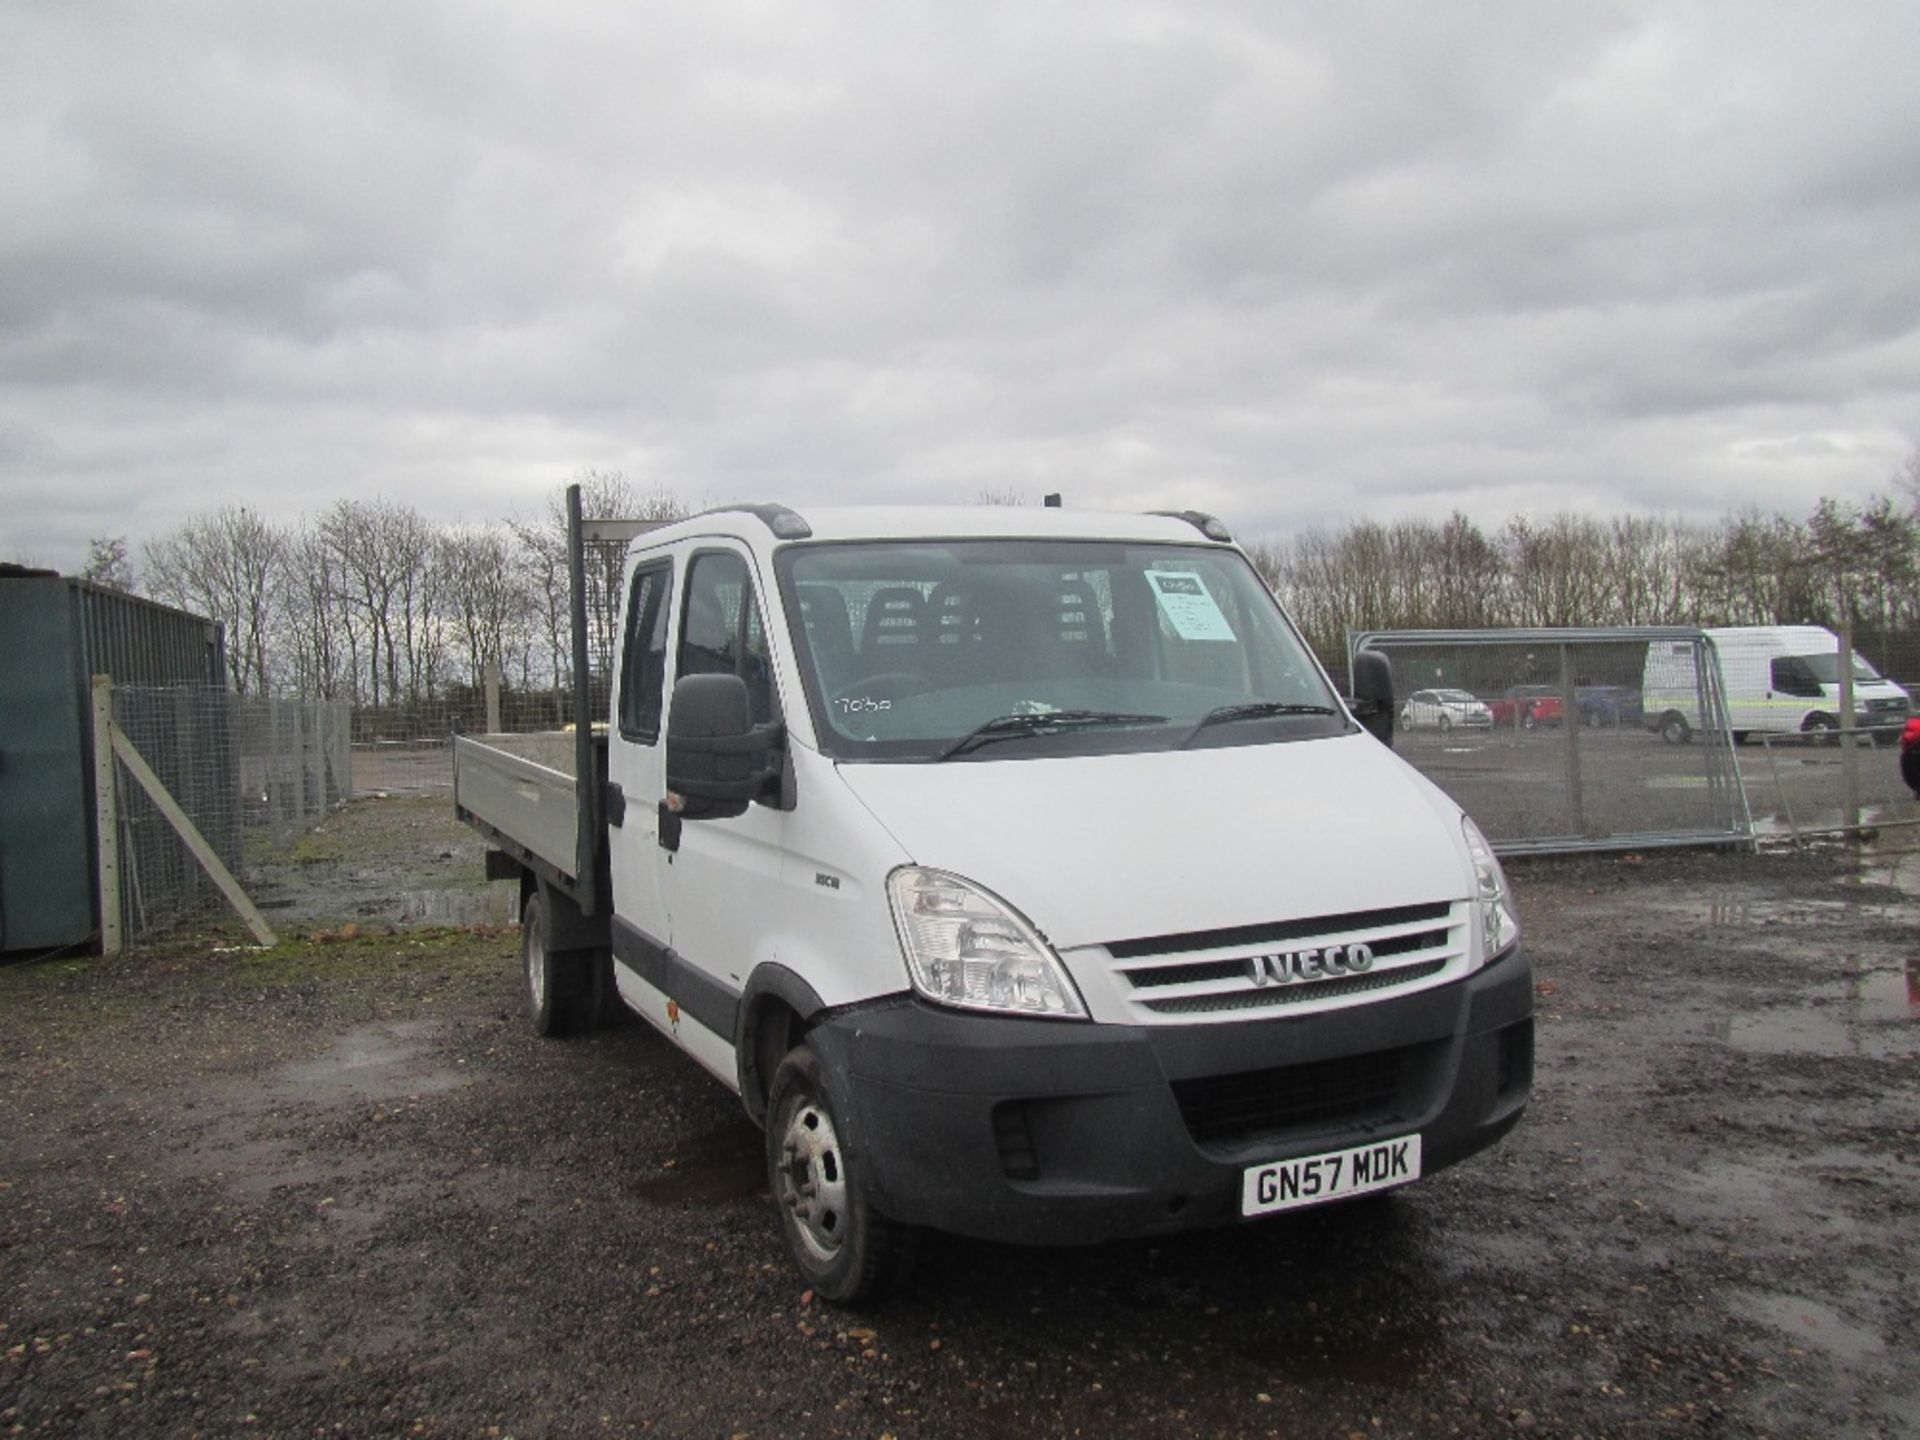 Iveco Daily 35C12 Crew Cab, Power Steering MOT 24/06/17 Reg. No. GN57 MDK - Image 3 of 8